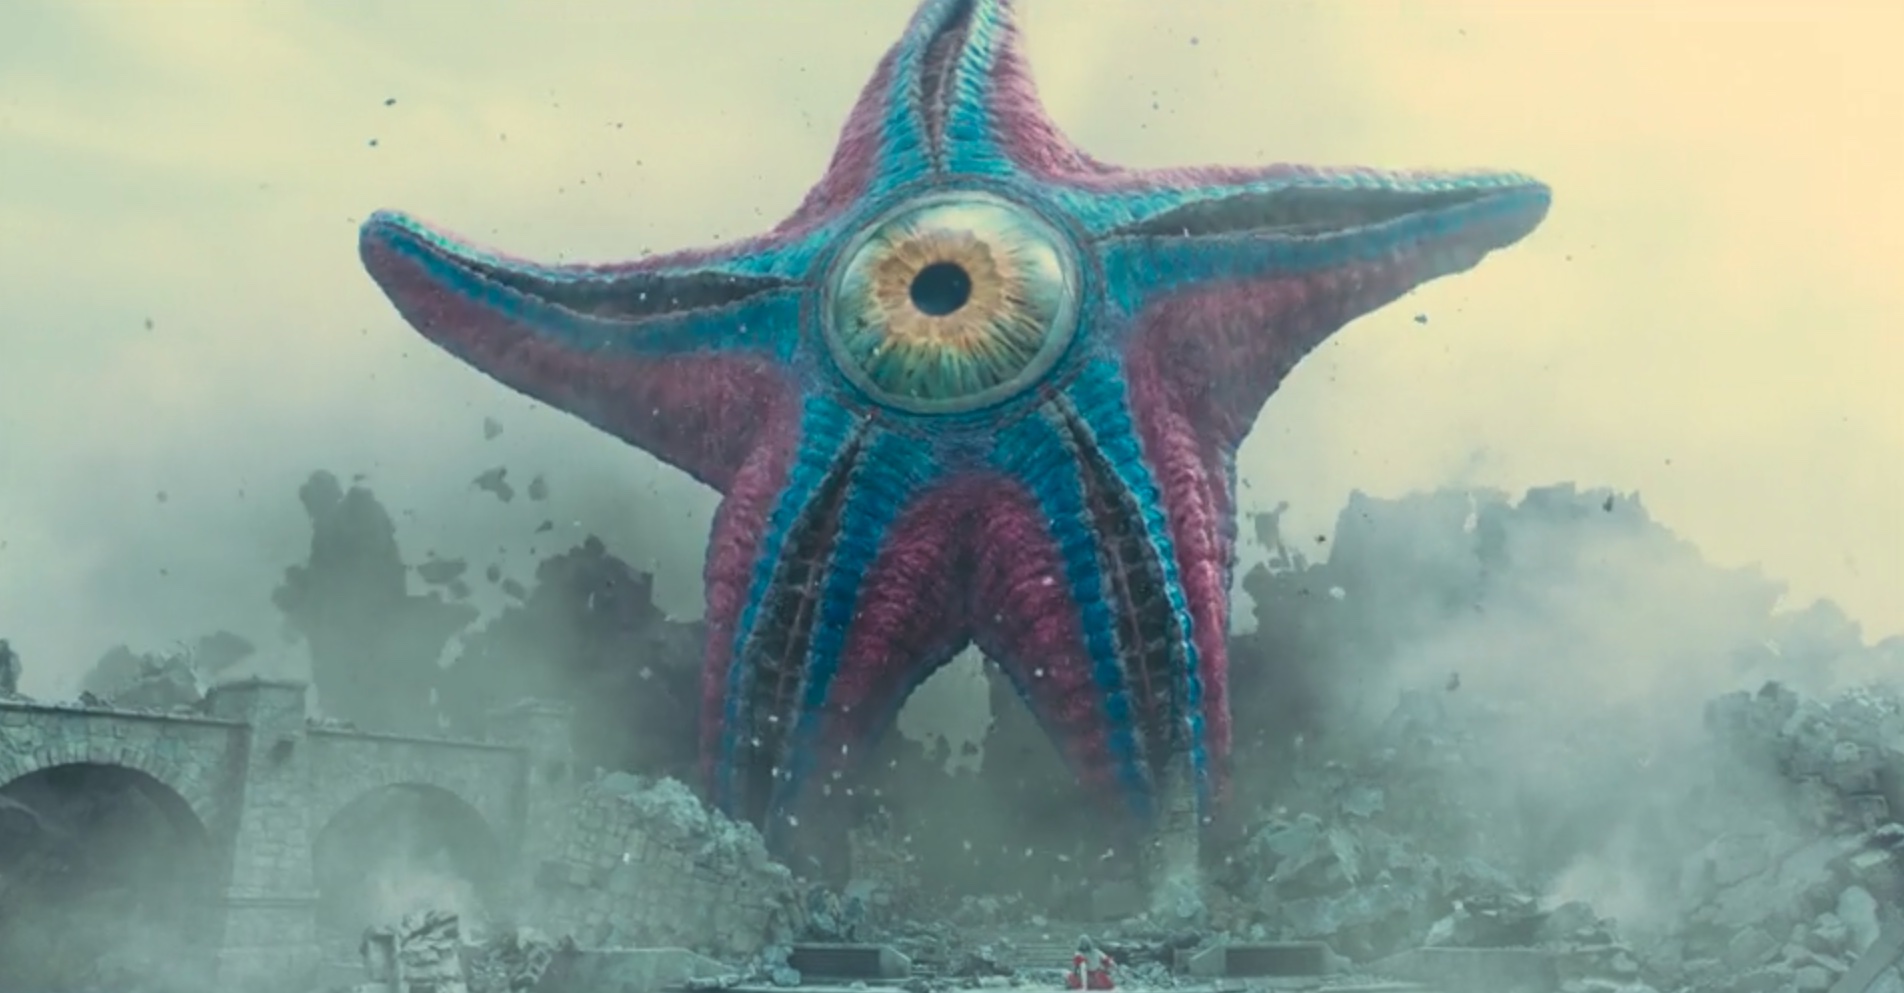 Starro the Conquerer breaks through a building in The Suicide Squad